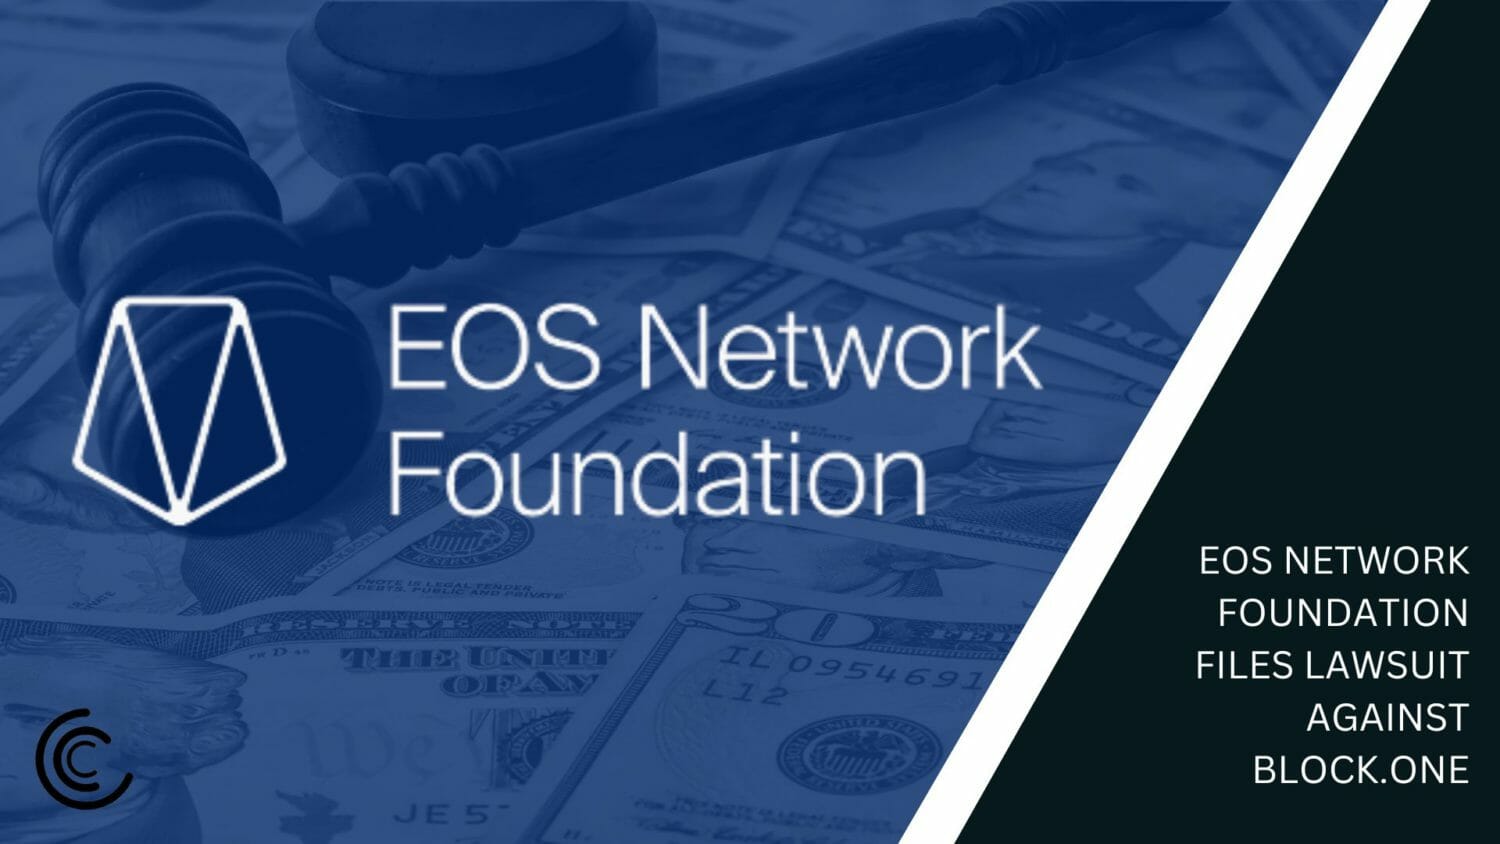 Eos Network Foundation Files Lawsuit Against Block.one